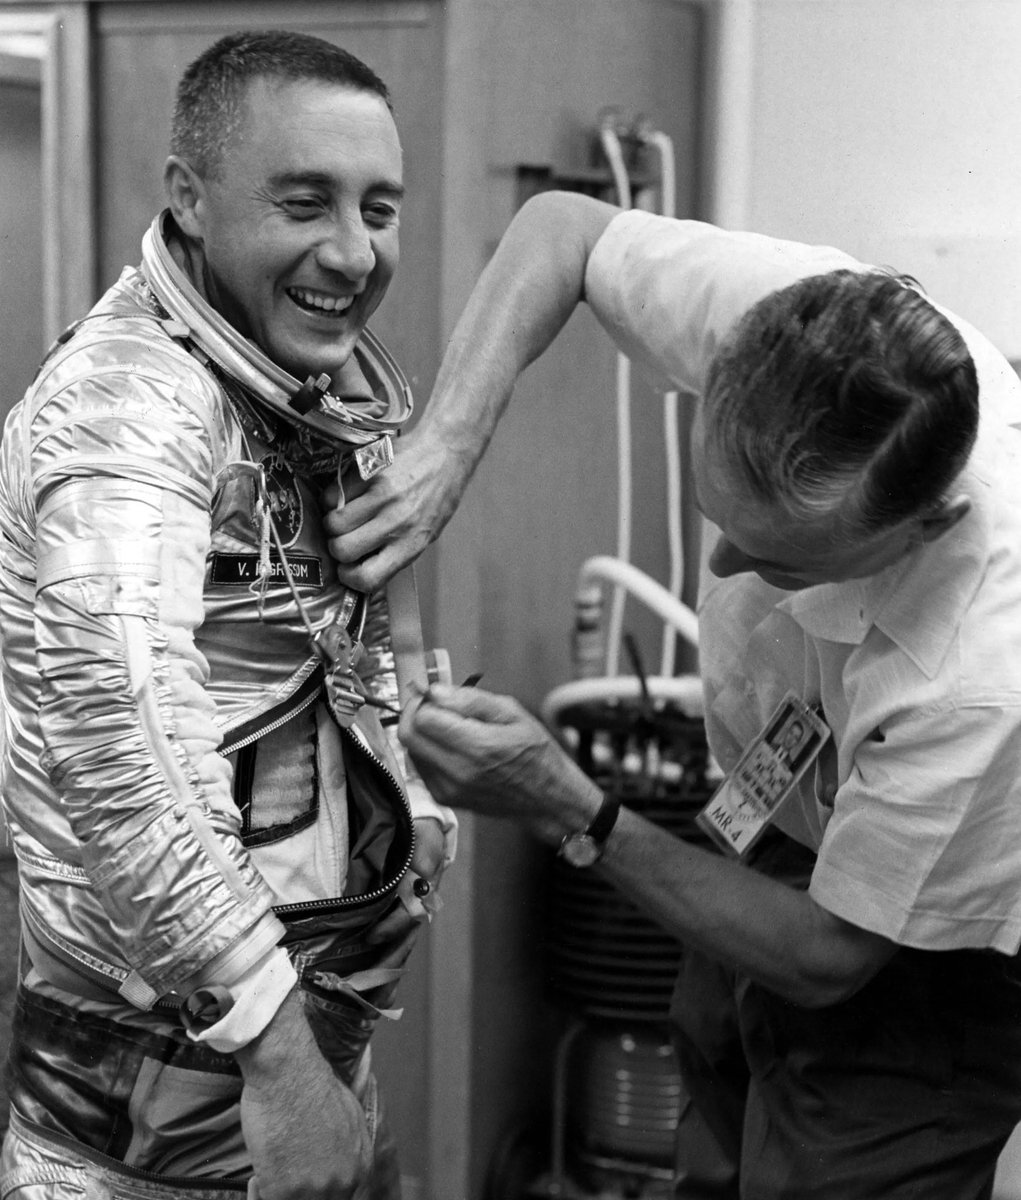 APRIL 3: #OnThisDay in 1926, Virgil “Gus” Grissom was born in Mitchell, Indiana. Let us remember his pioneering spirit for exploration. His courage and dedication to space continues to inspire generations!